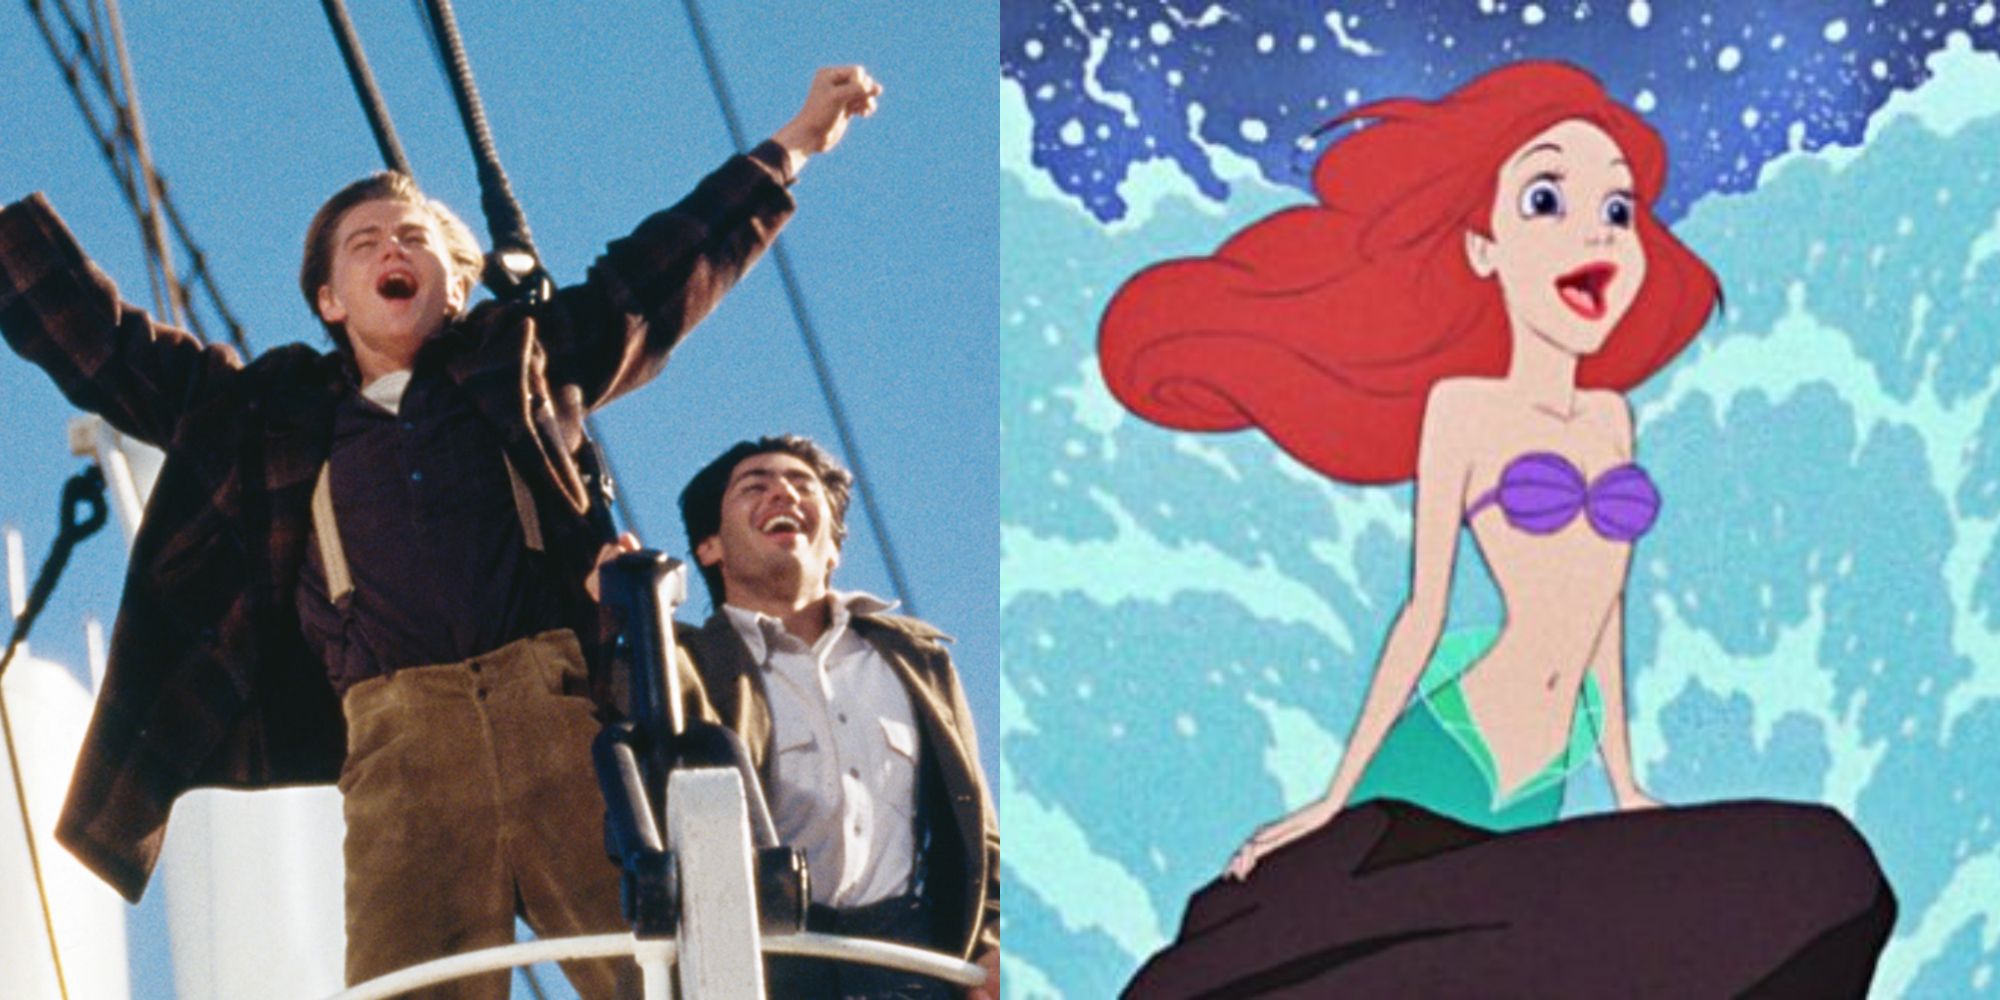 Split image of Jack Dawson in Titanic and Ariel in The Little Mermaid